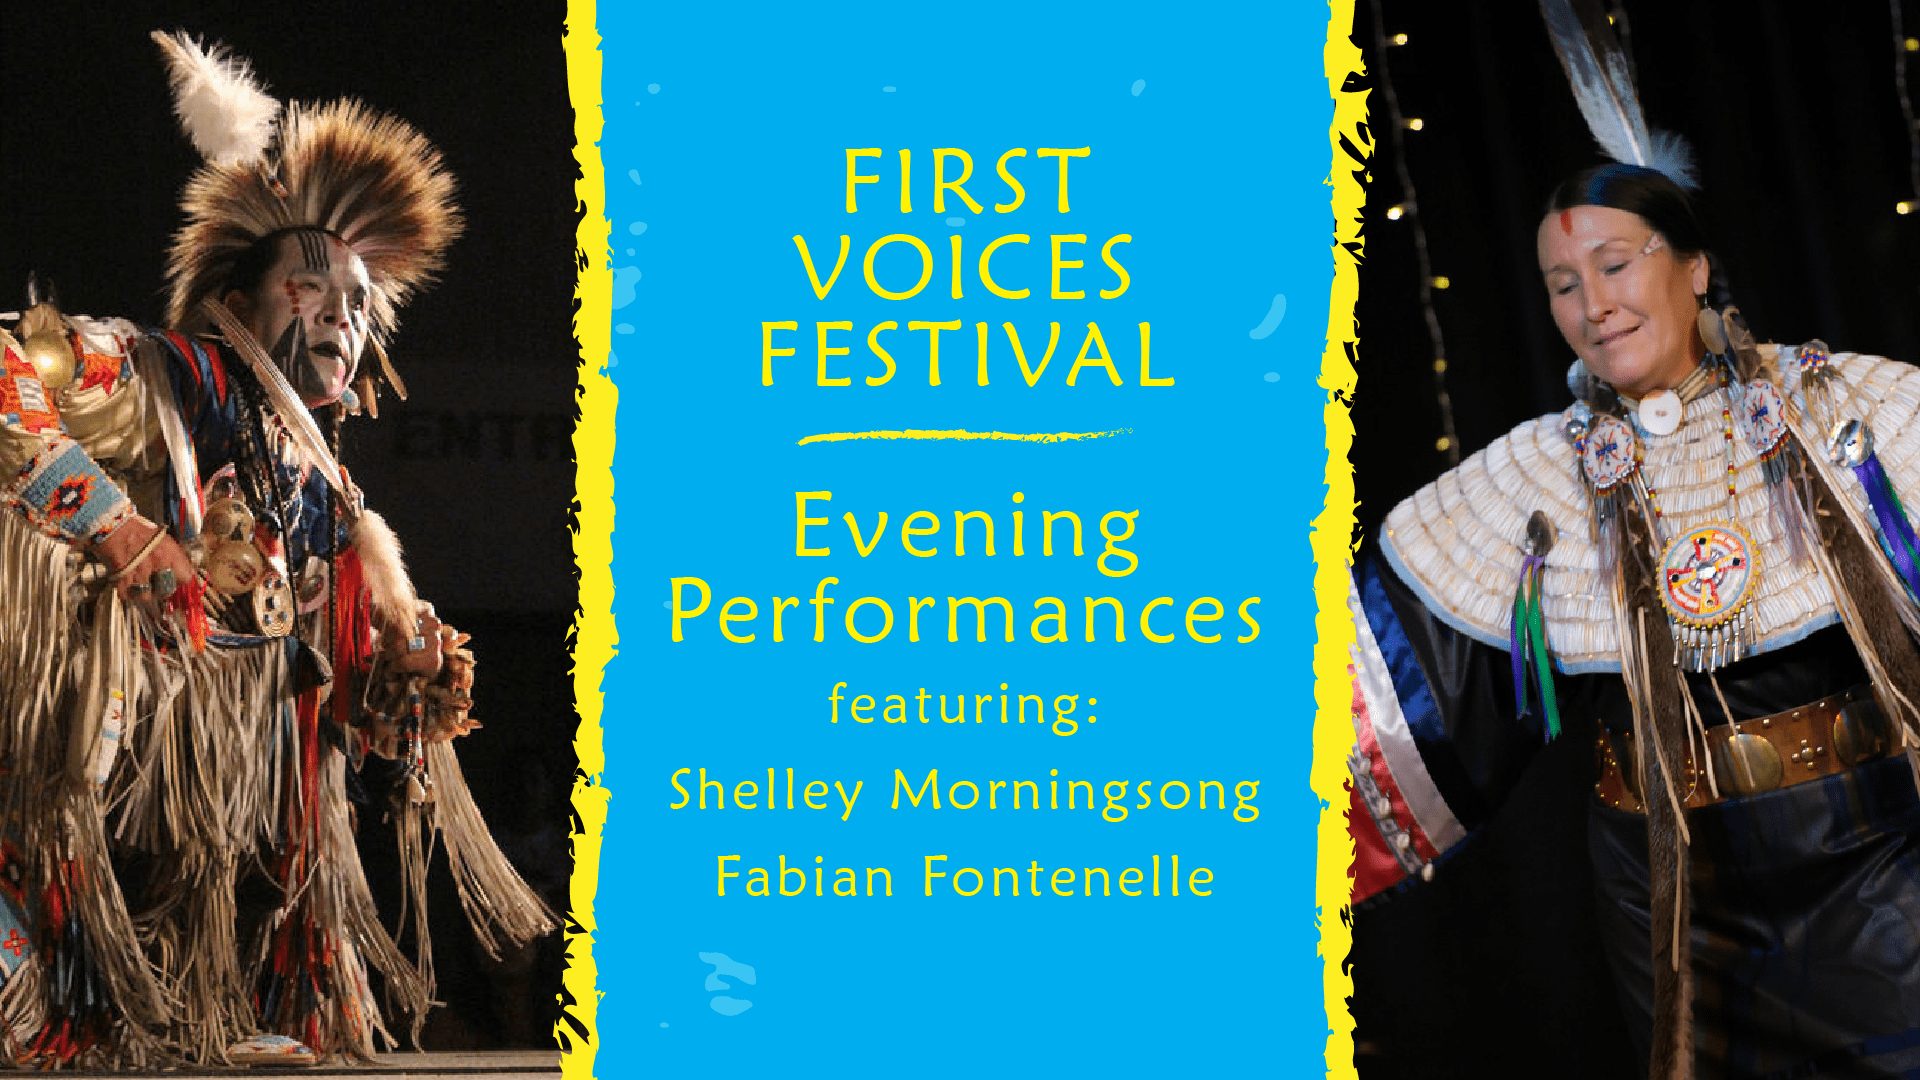 First Voices Festival Evening Performances featuring Shelley Morningsong and Fabian Fontenelle